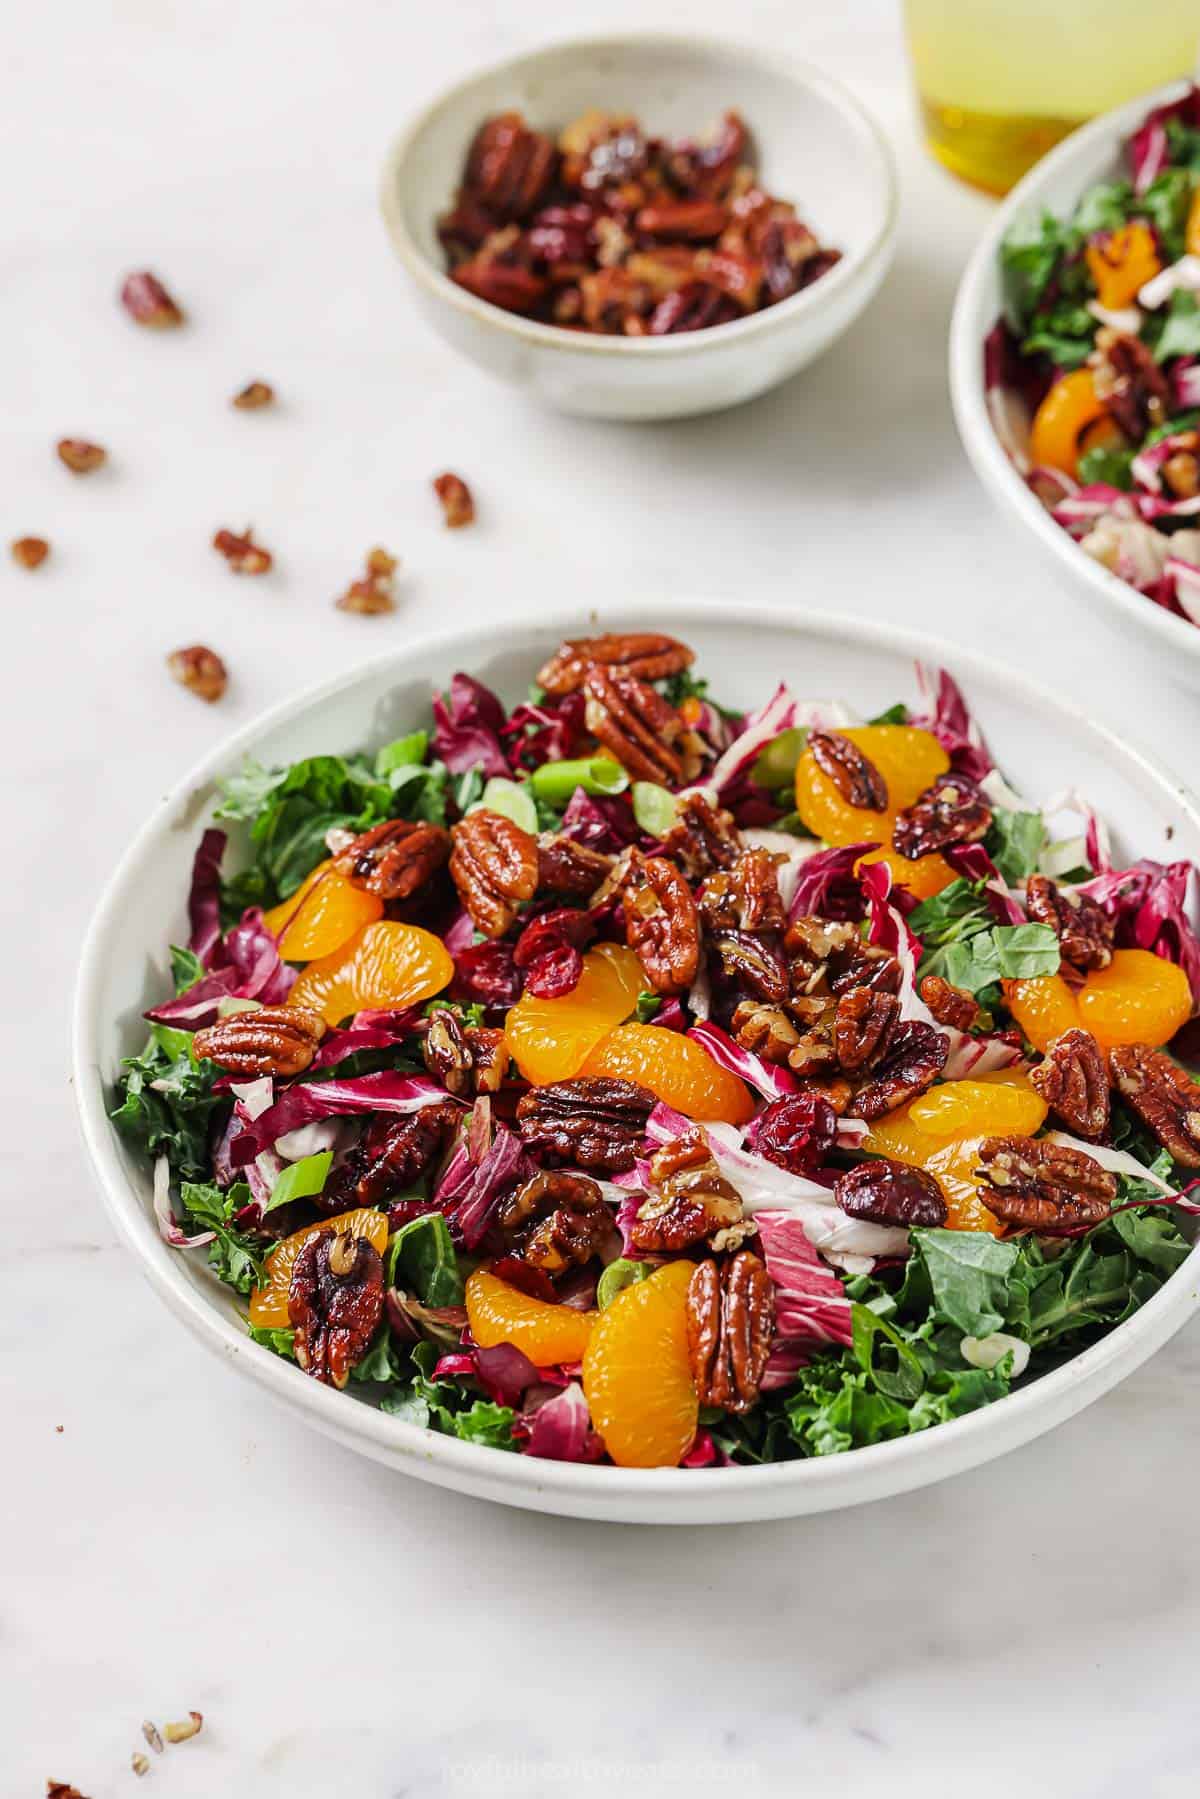 A bowl of kale salad with dressing and candied pecans.